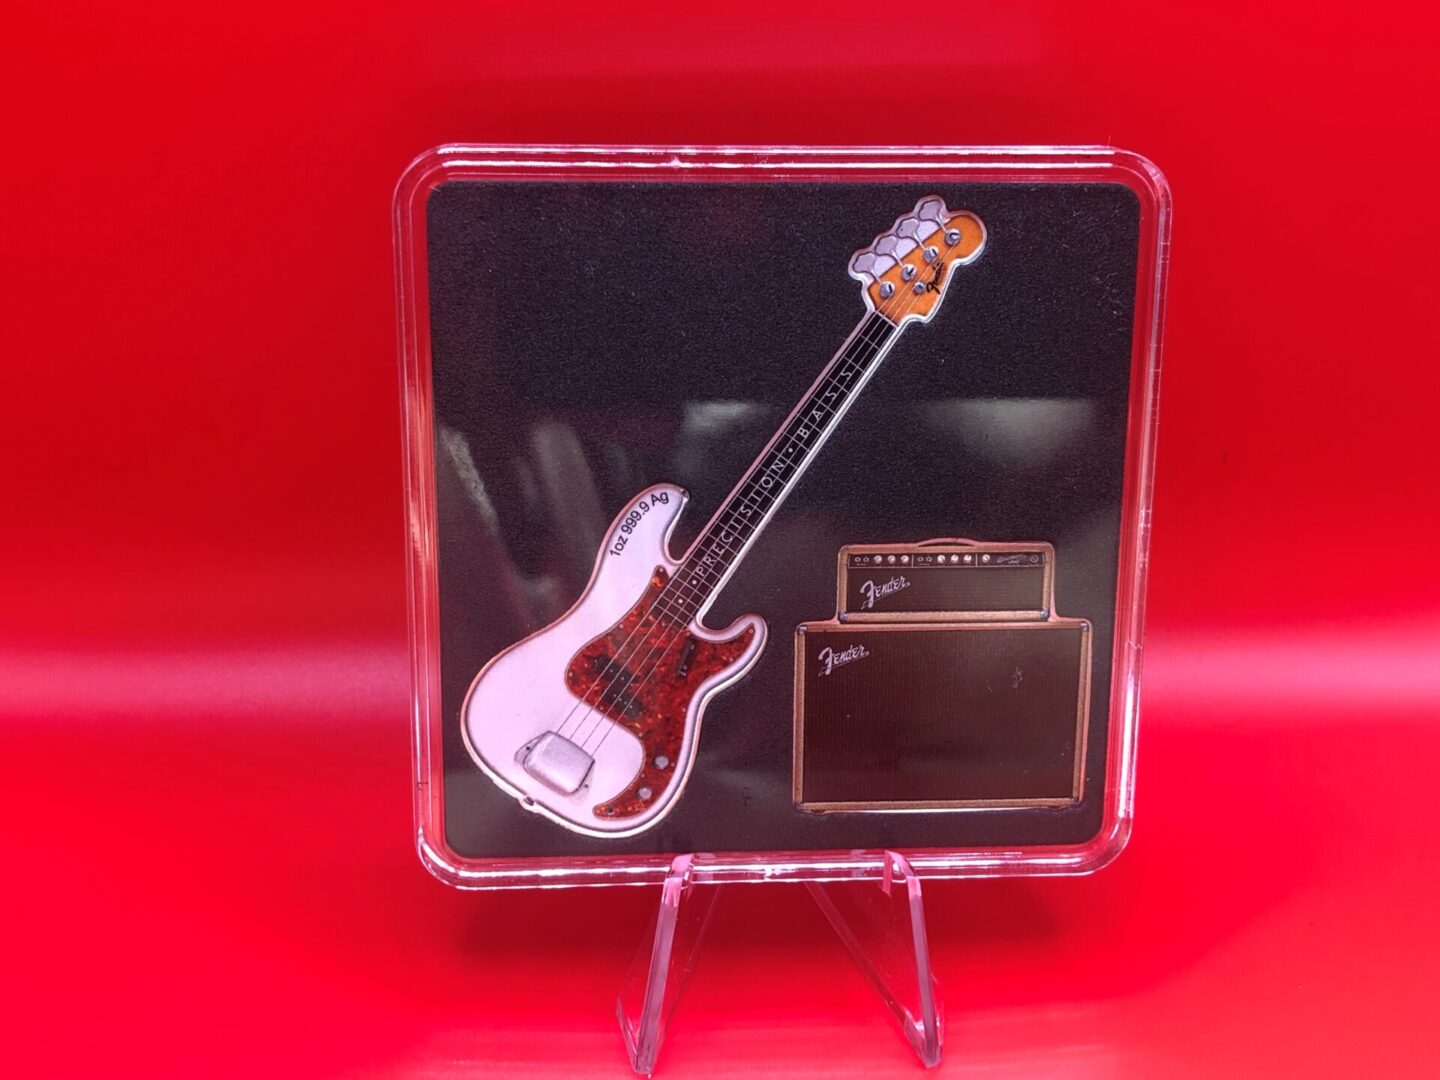 A DYNAMIC DUO - 2X Fine Silver Shaped Coin Set bass guitar and amp on a vibrant red background, forming a dynamic duo.